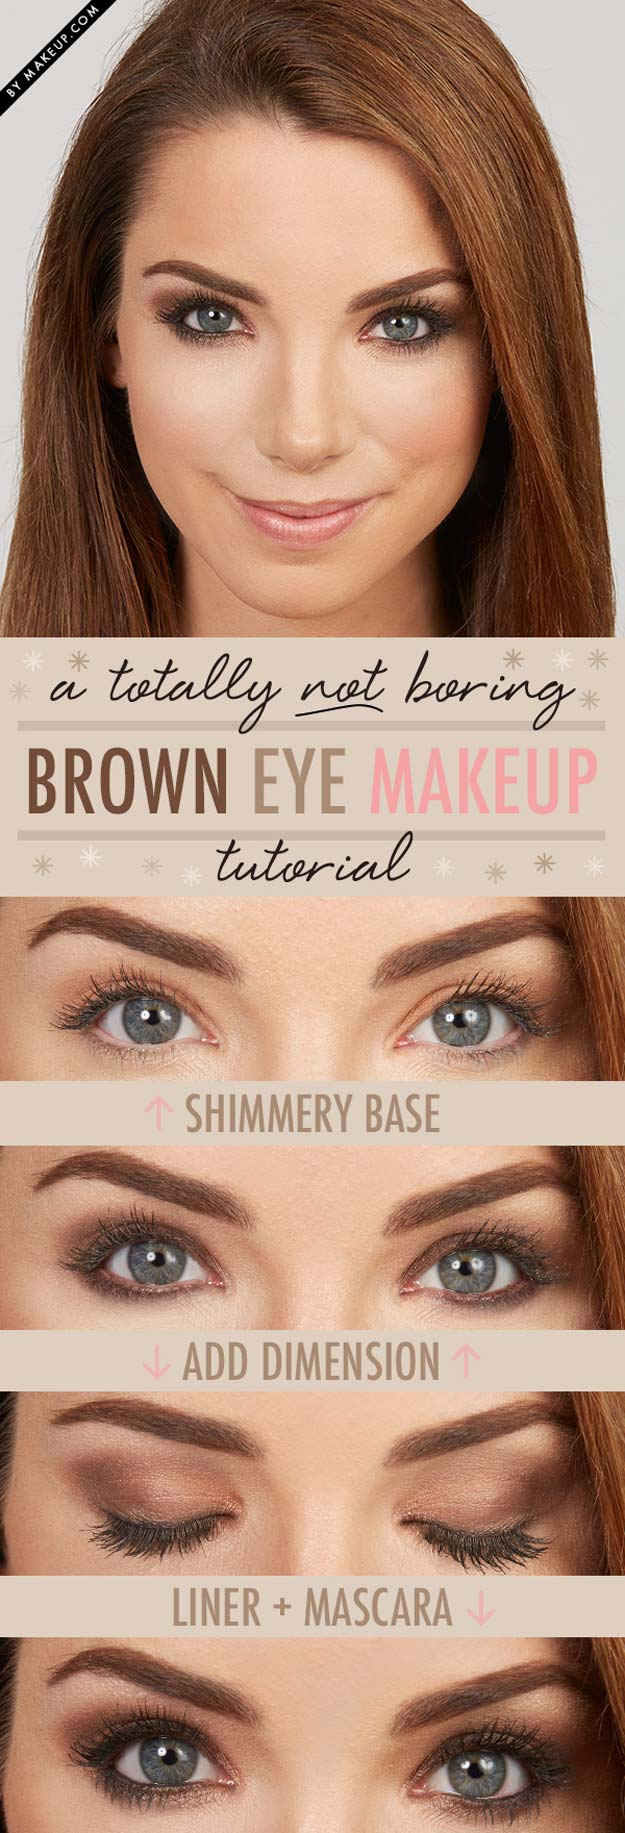 How To Do Makeup For Brown Eyes 34 Sexy Eye Makeup Tutorials The Goddess